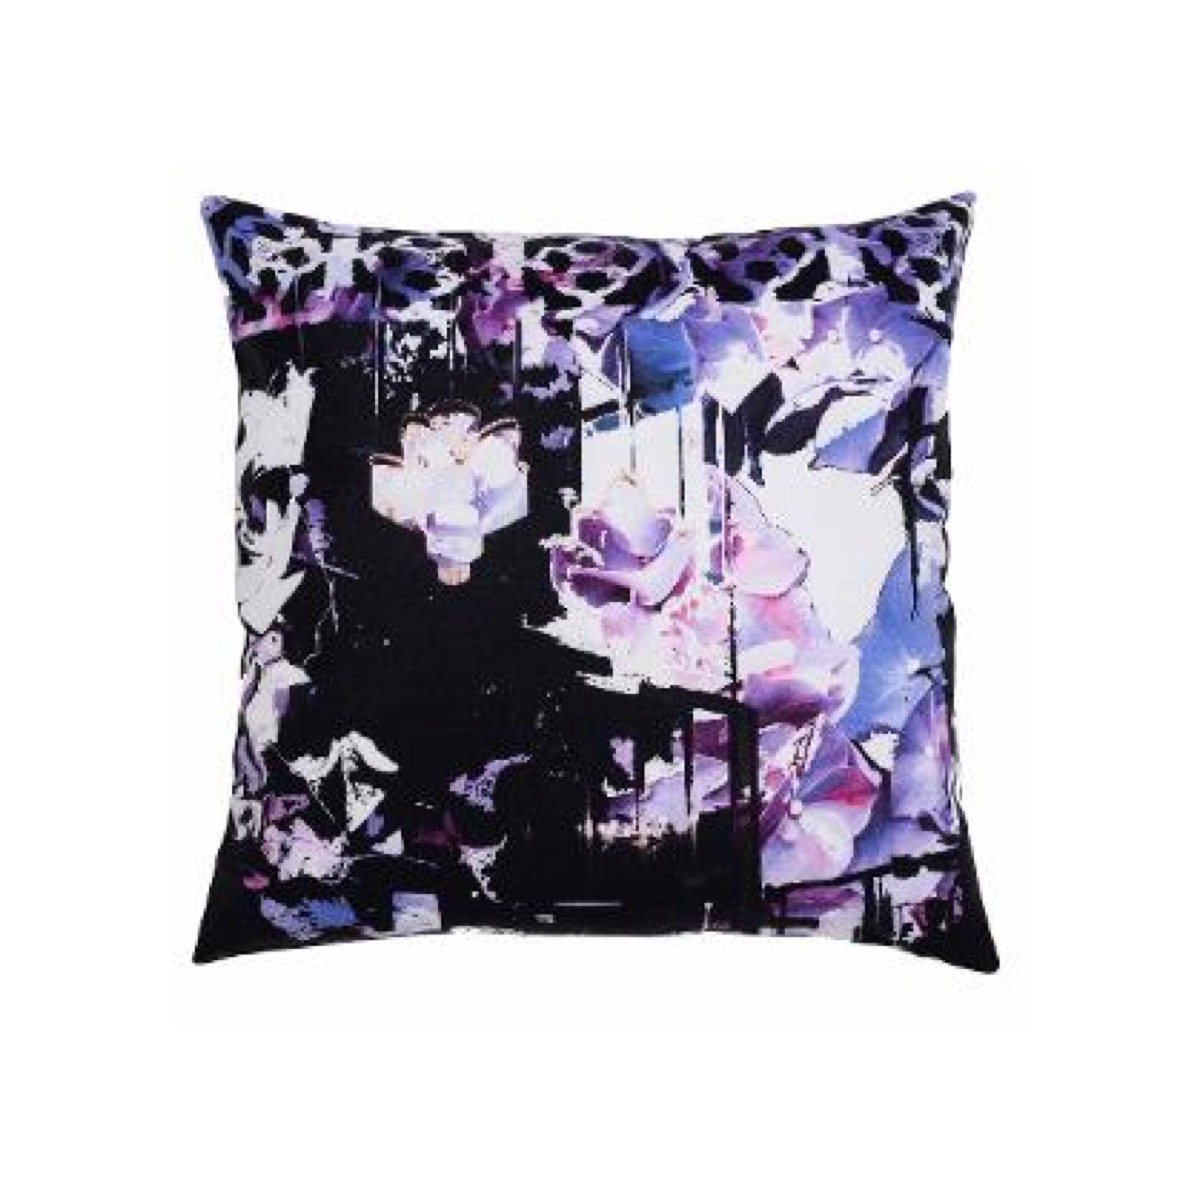 Muse Cushion Cover